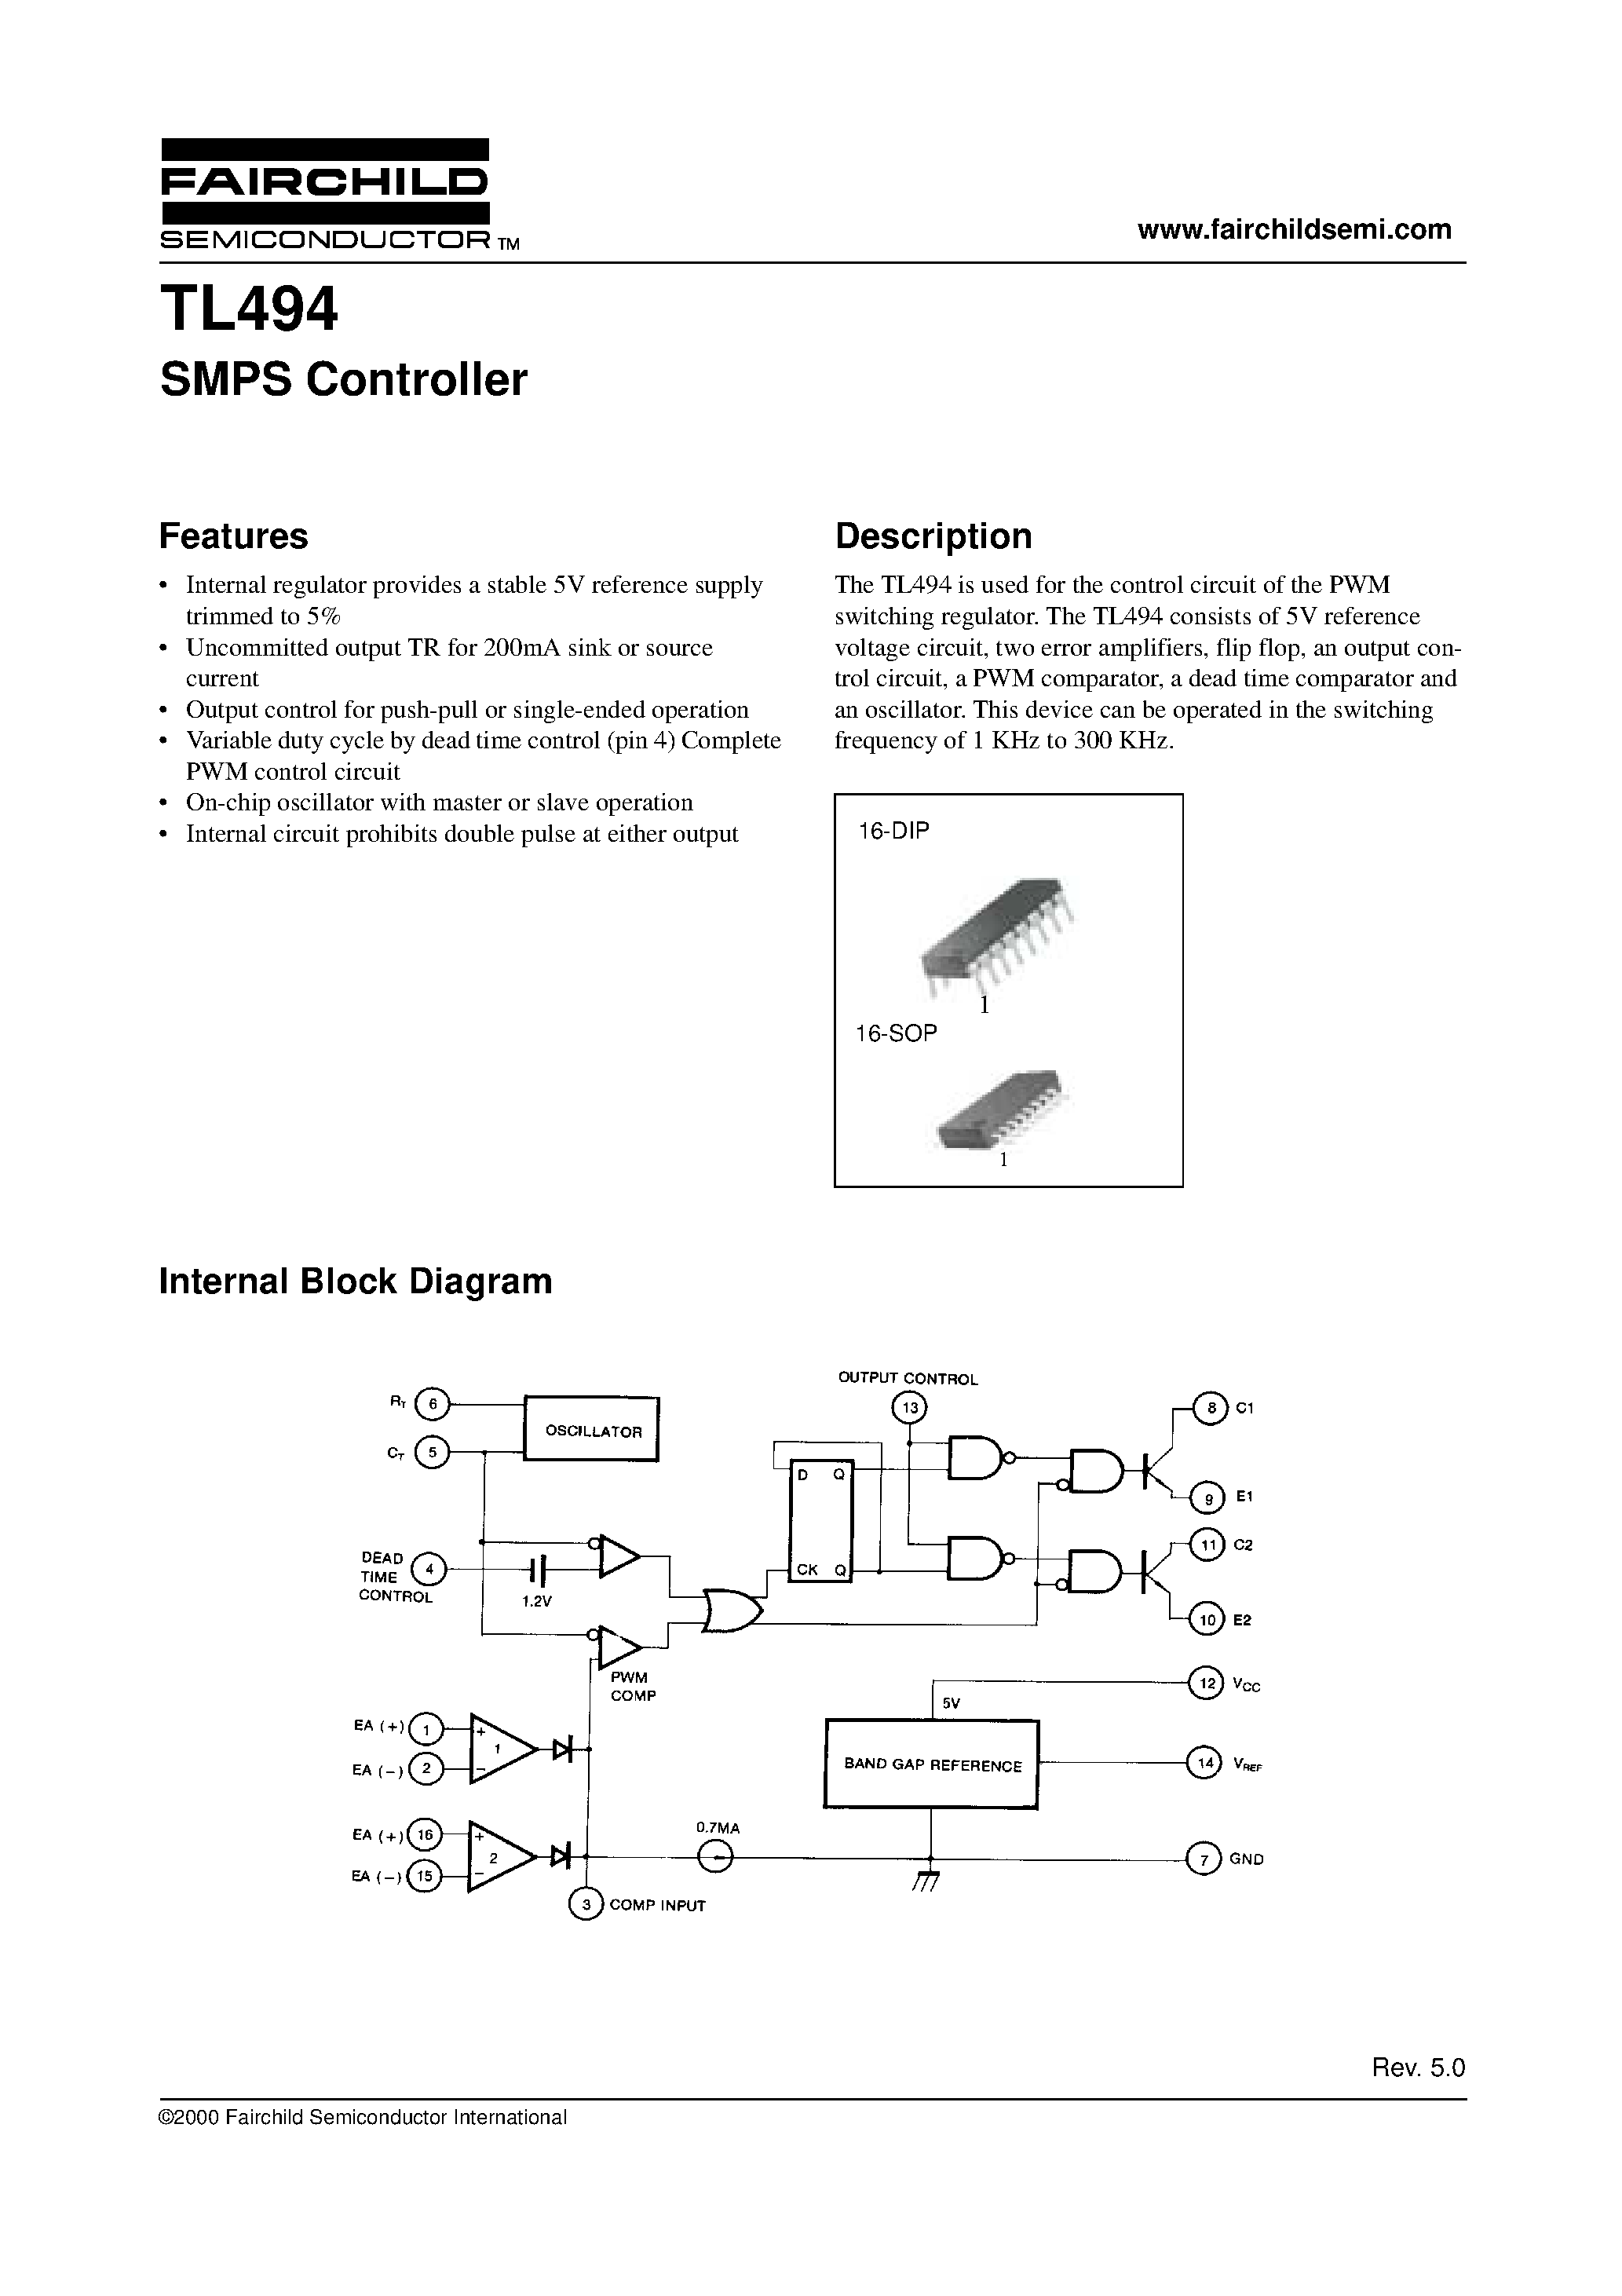 Datasheet TL494 - SMPS Controller page 1